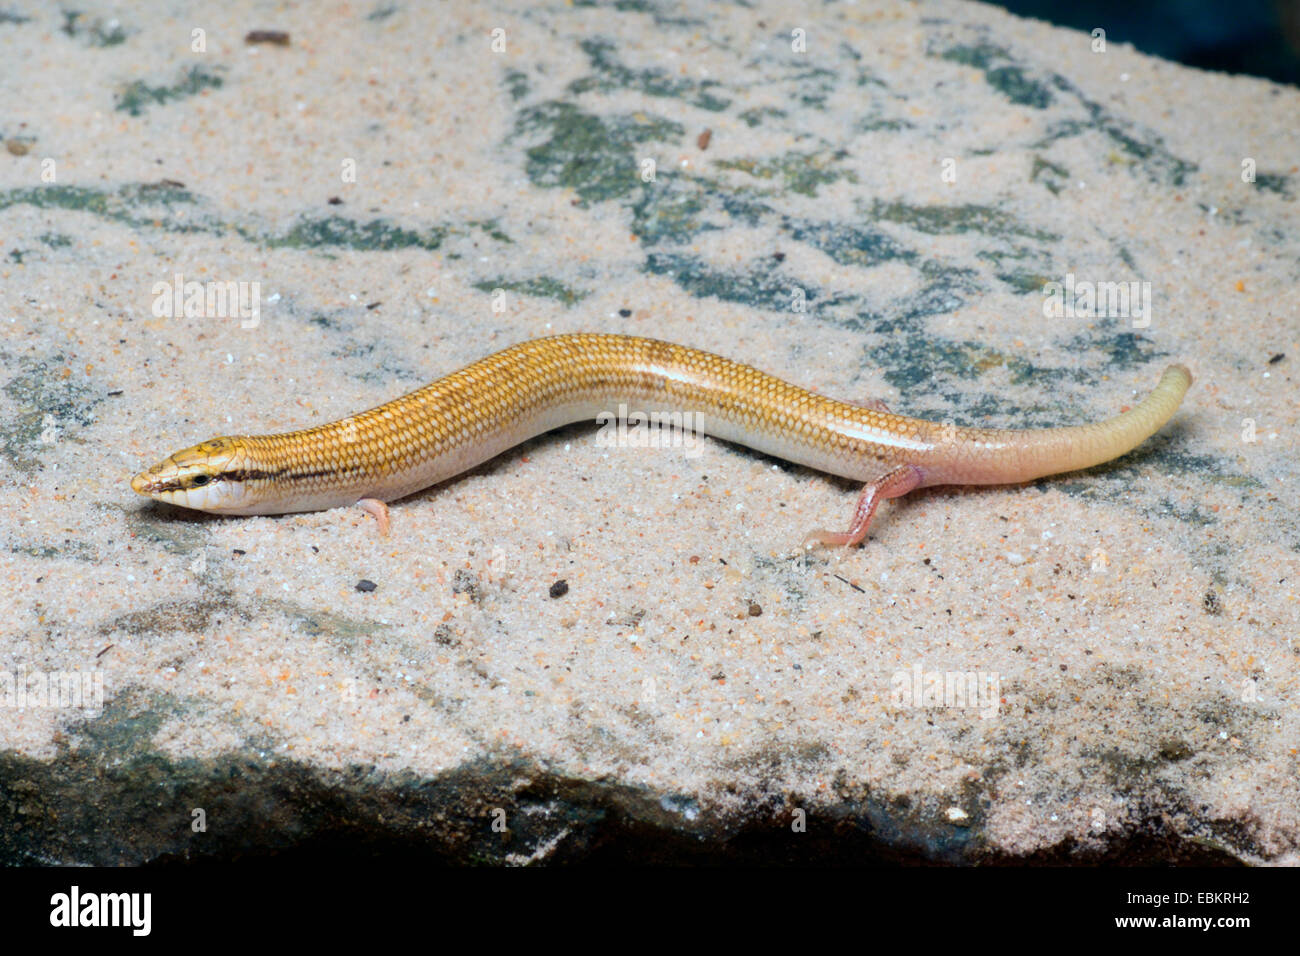 Wedge-snouted skink, Elongated barrel skink (Chalcides sepsoides), side view Stock Photo